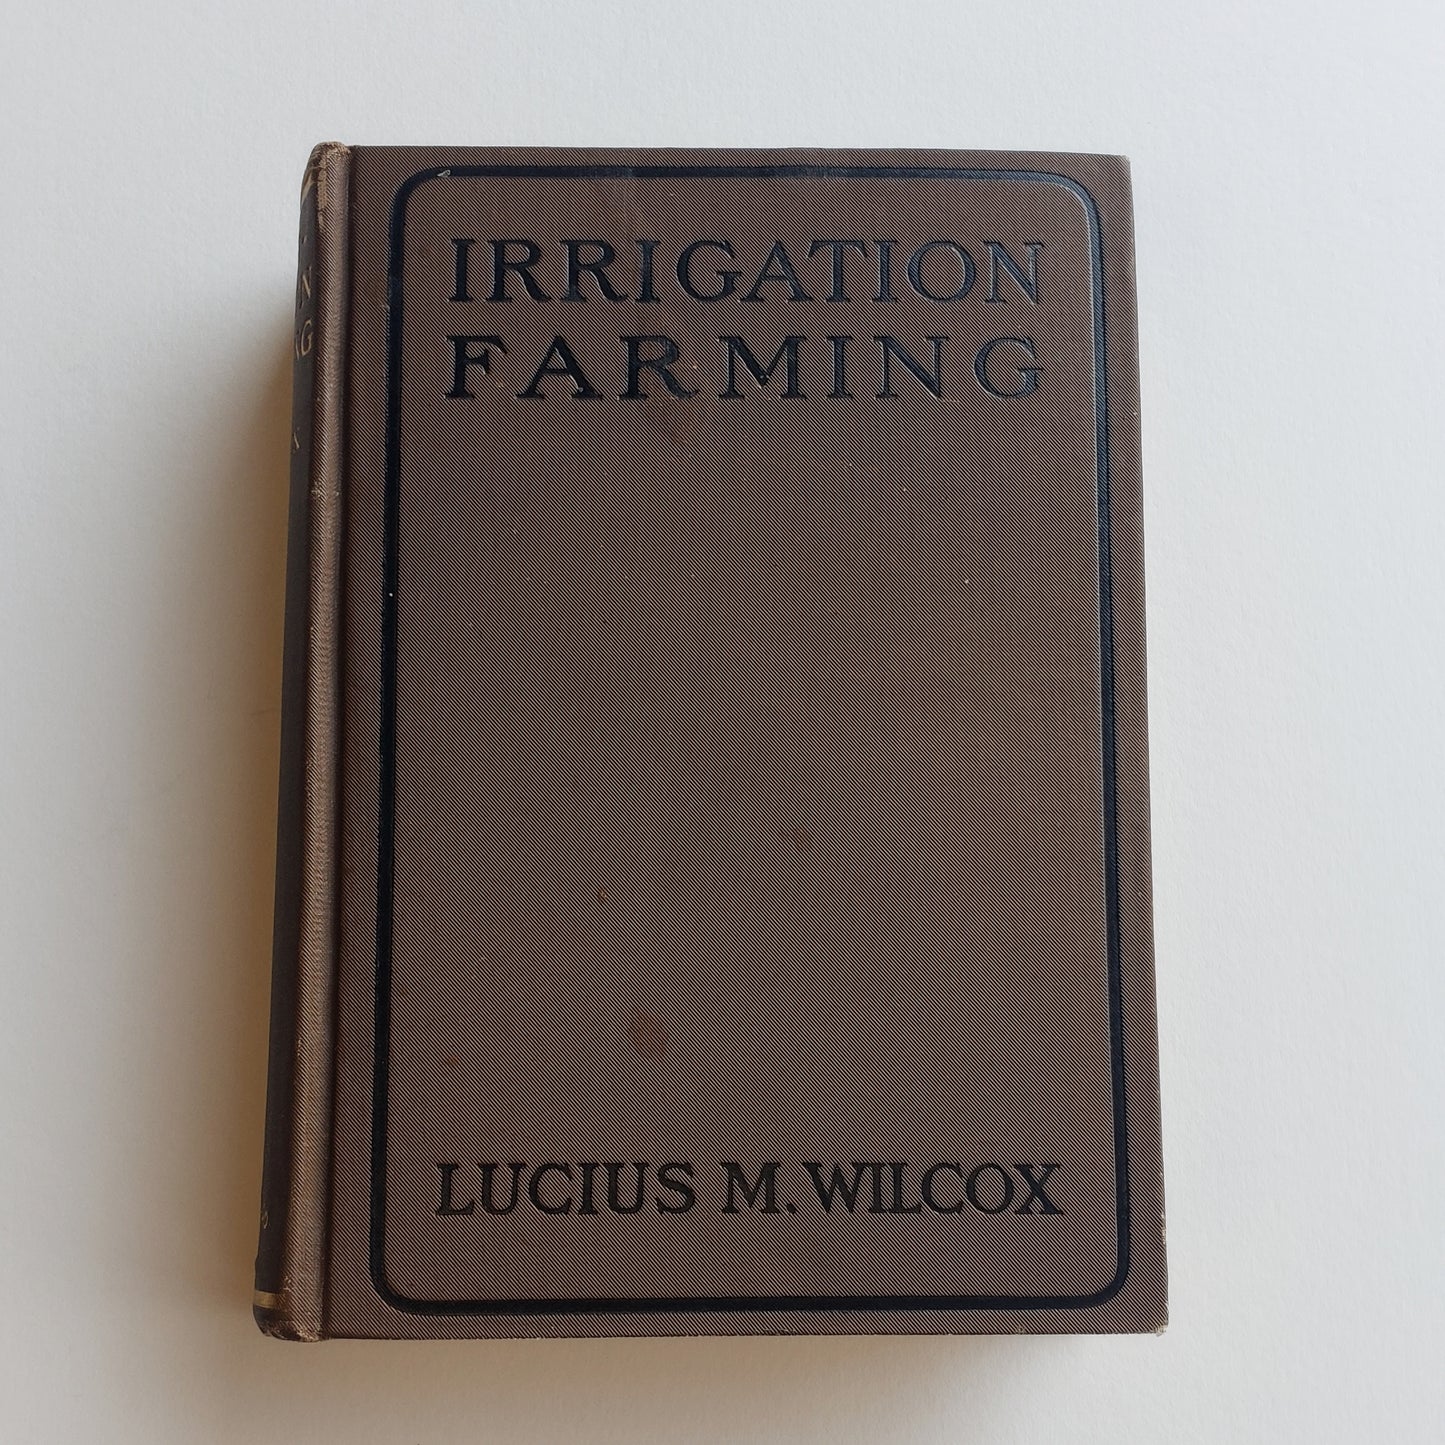 Vintage Book- Irrigation Farming by Lucius M. Wilcox (Science)